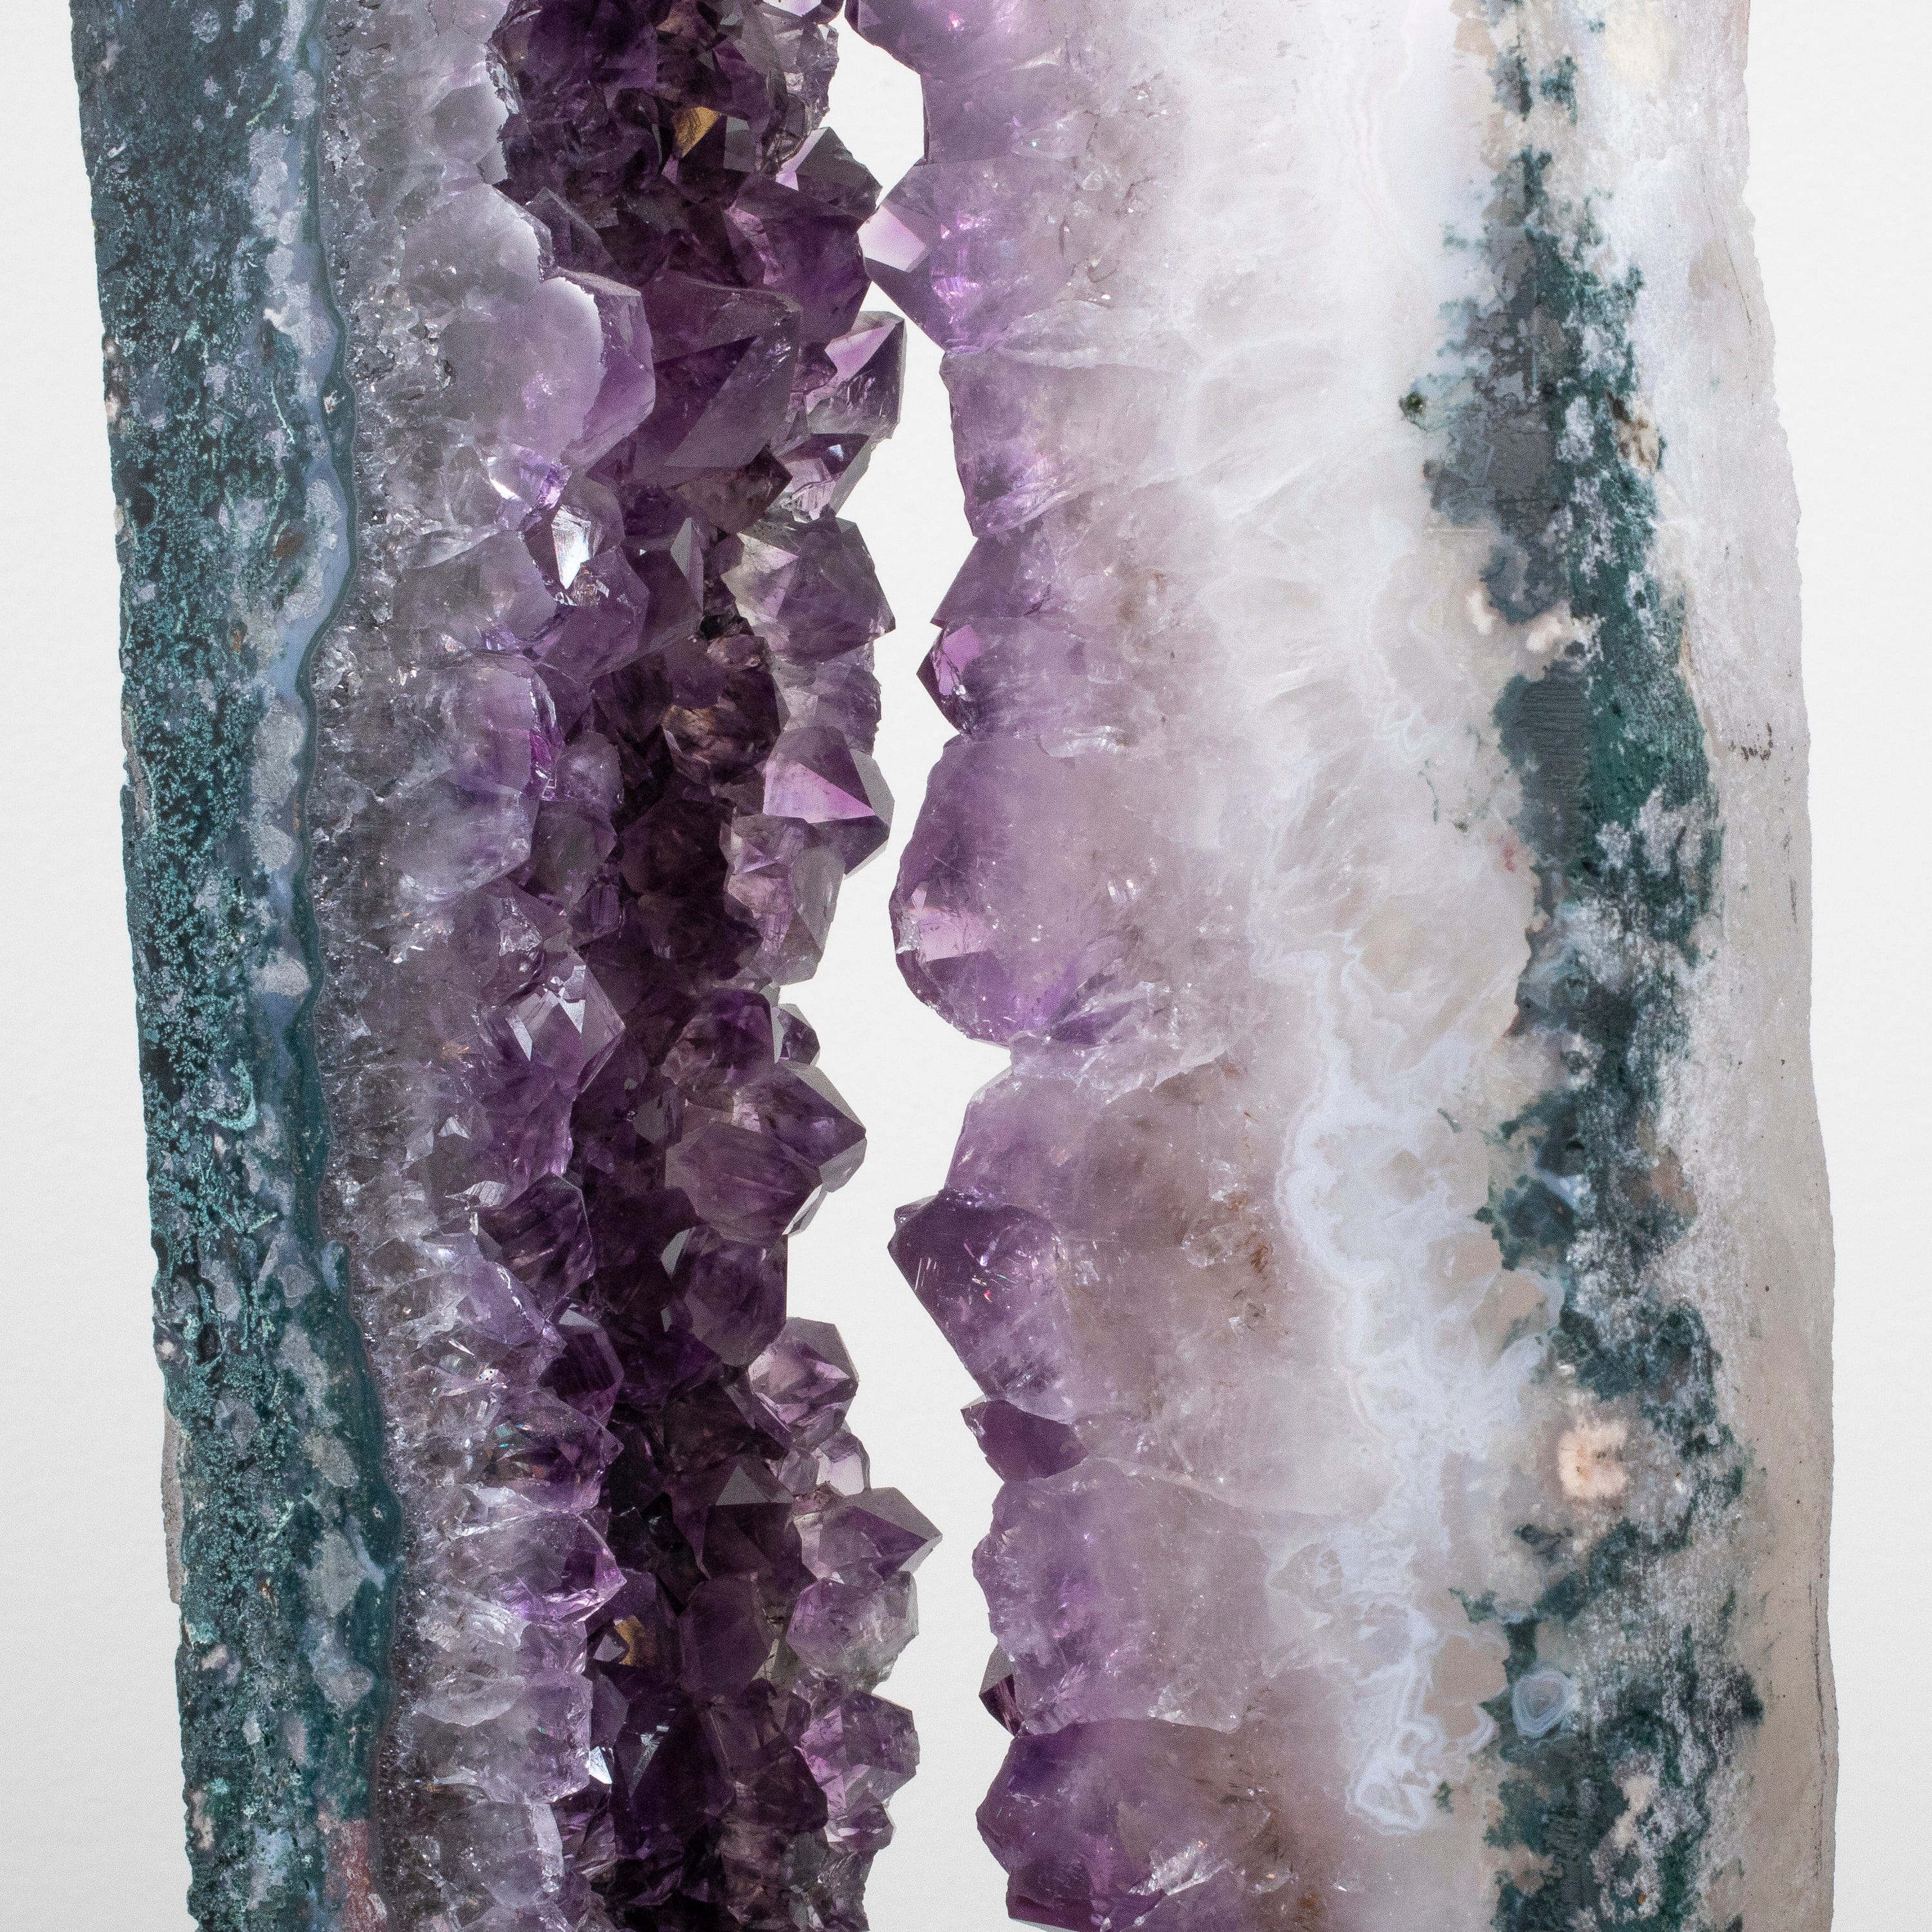 Kalifano Amethyst Amethyst Geode Wings from Brazil on Custom Stand- 38" / 39 lbs BAG8000.009